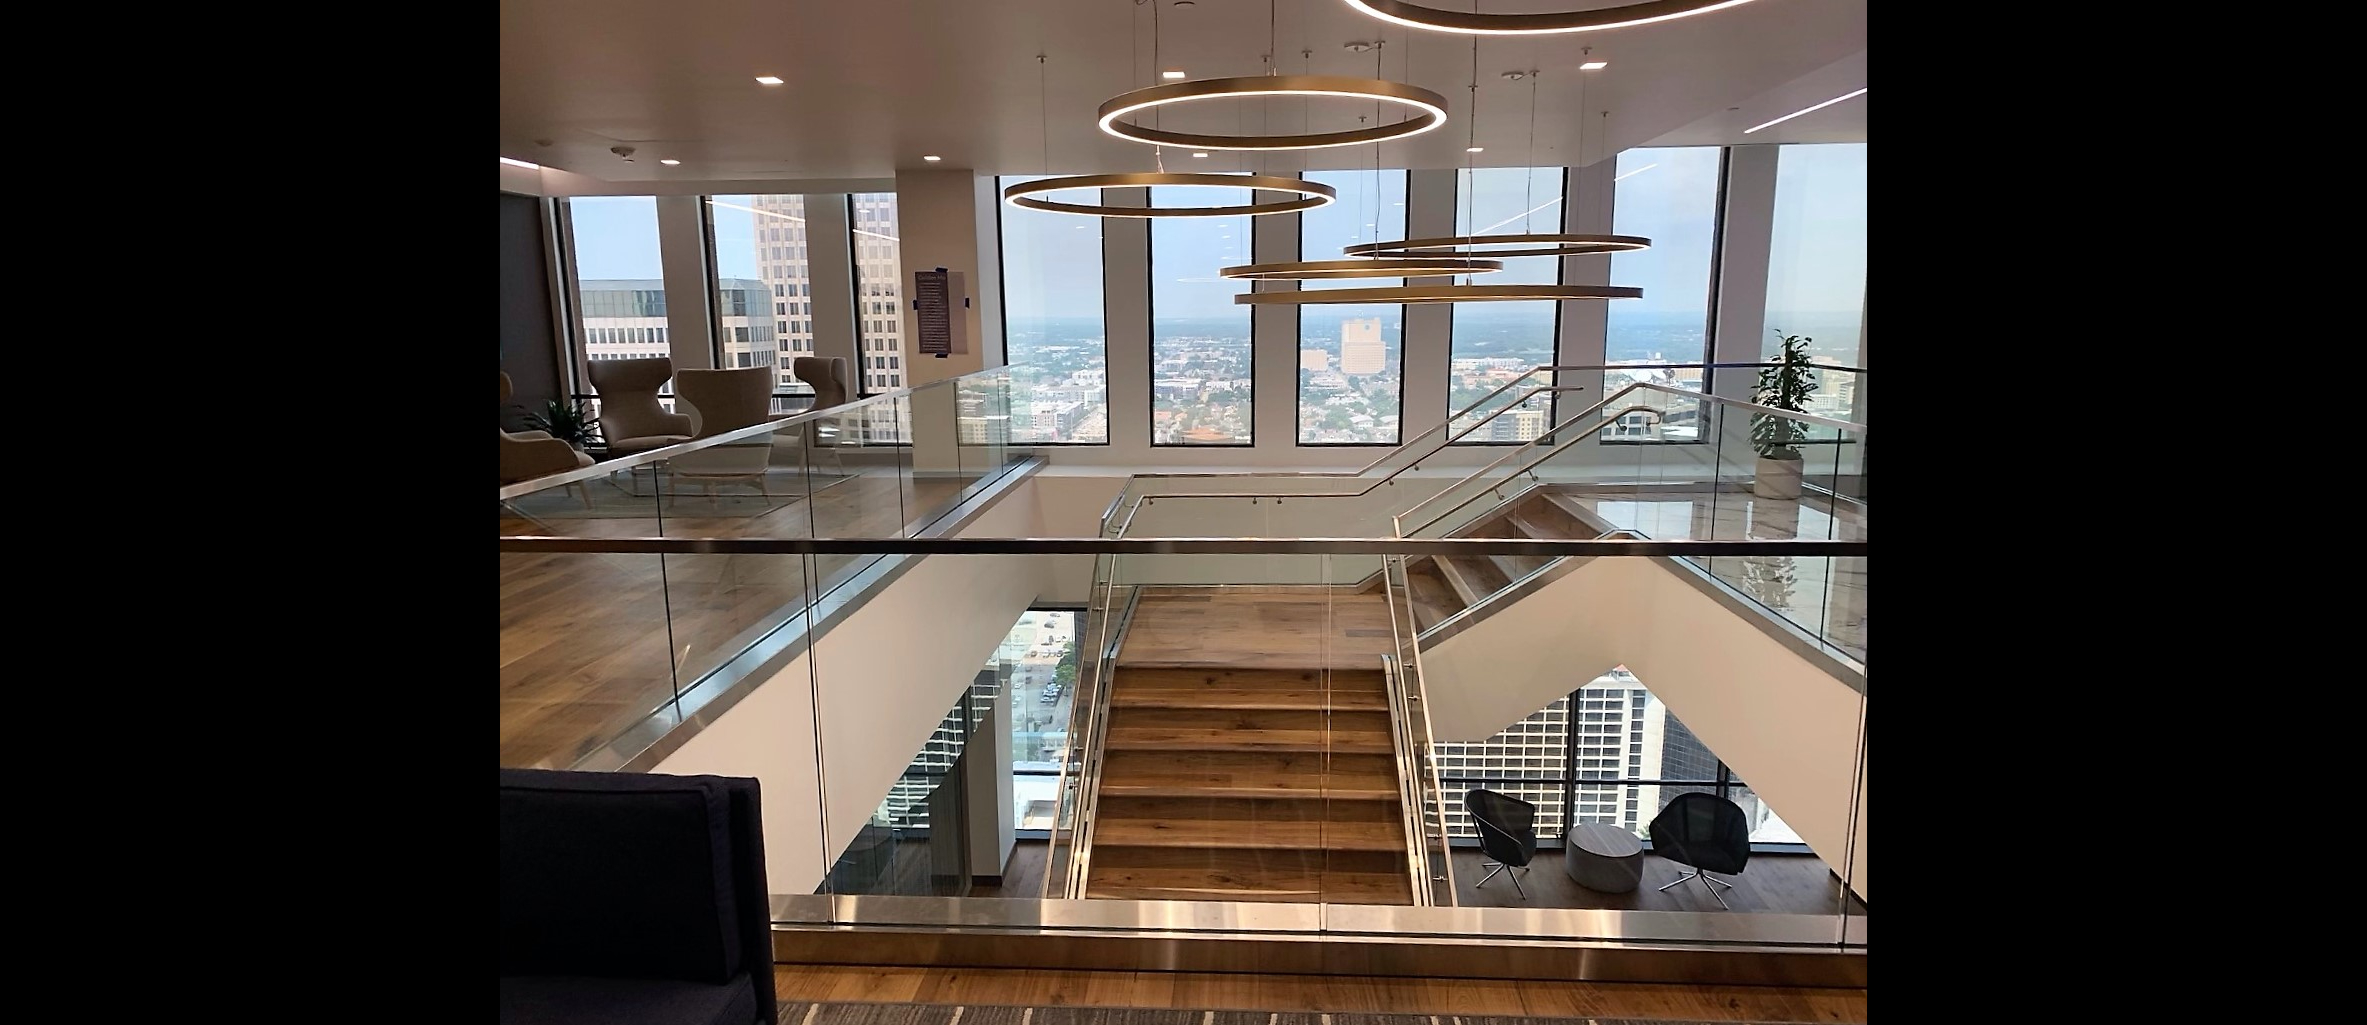 Hilltop Securities selects HDI’s Optik™ Shoe railing for new office